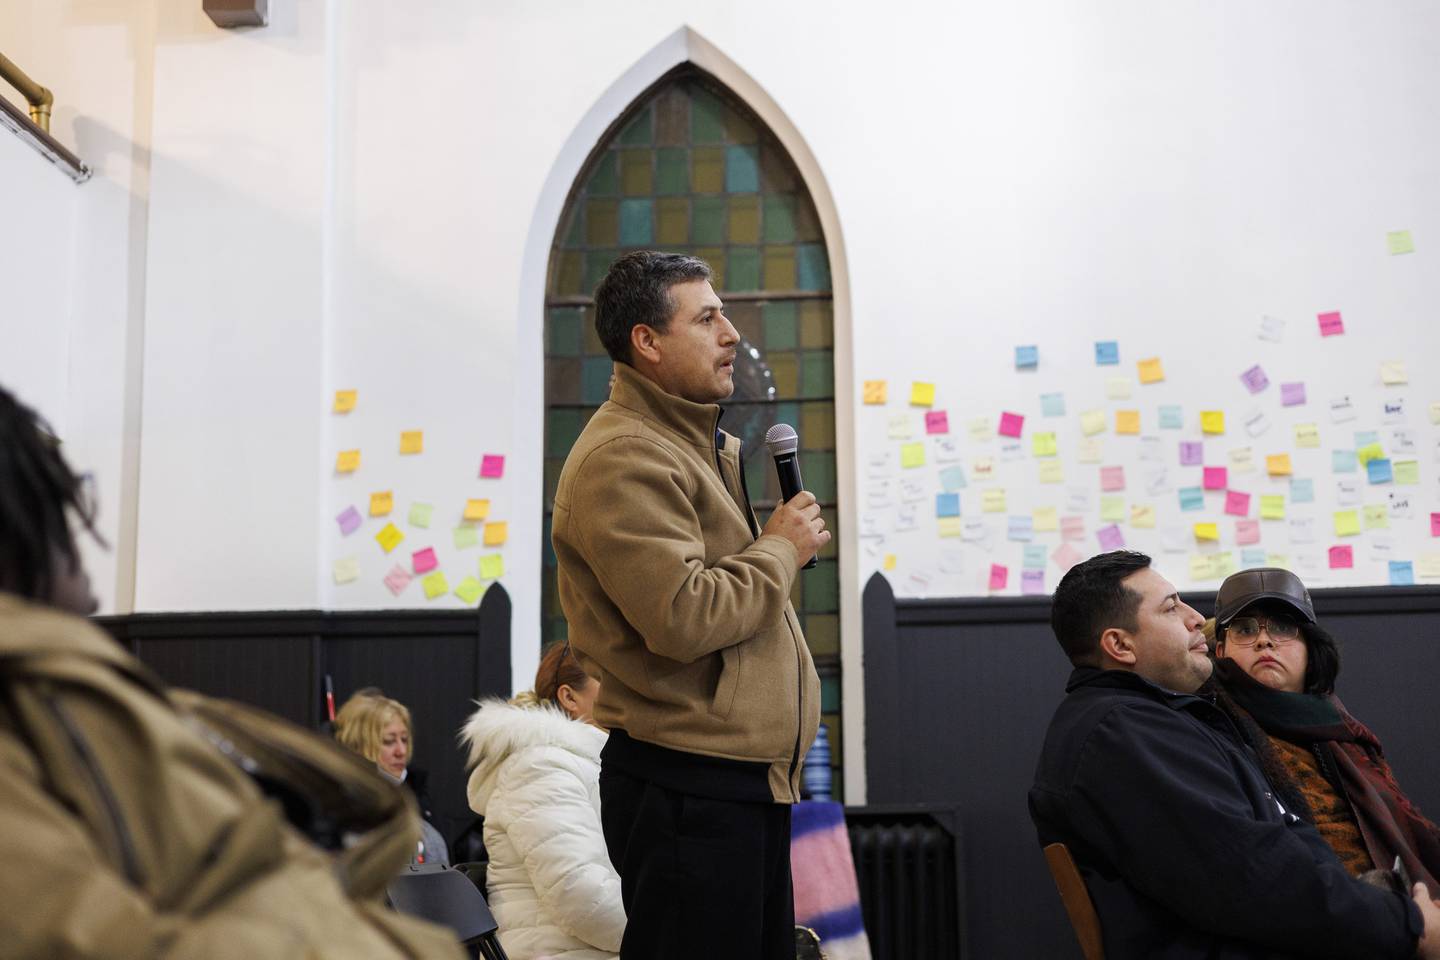 Juan Carlos Padilla, a parent of a Benito Juarez High School student, speaks at the Lincoln United Methodist Church during a community meeting in response to a fatal shooting at the school on Friday.